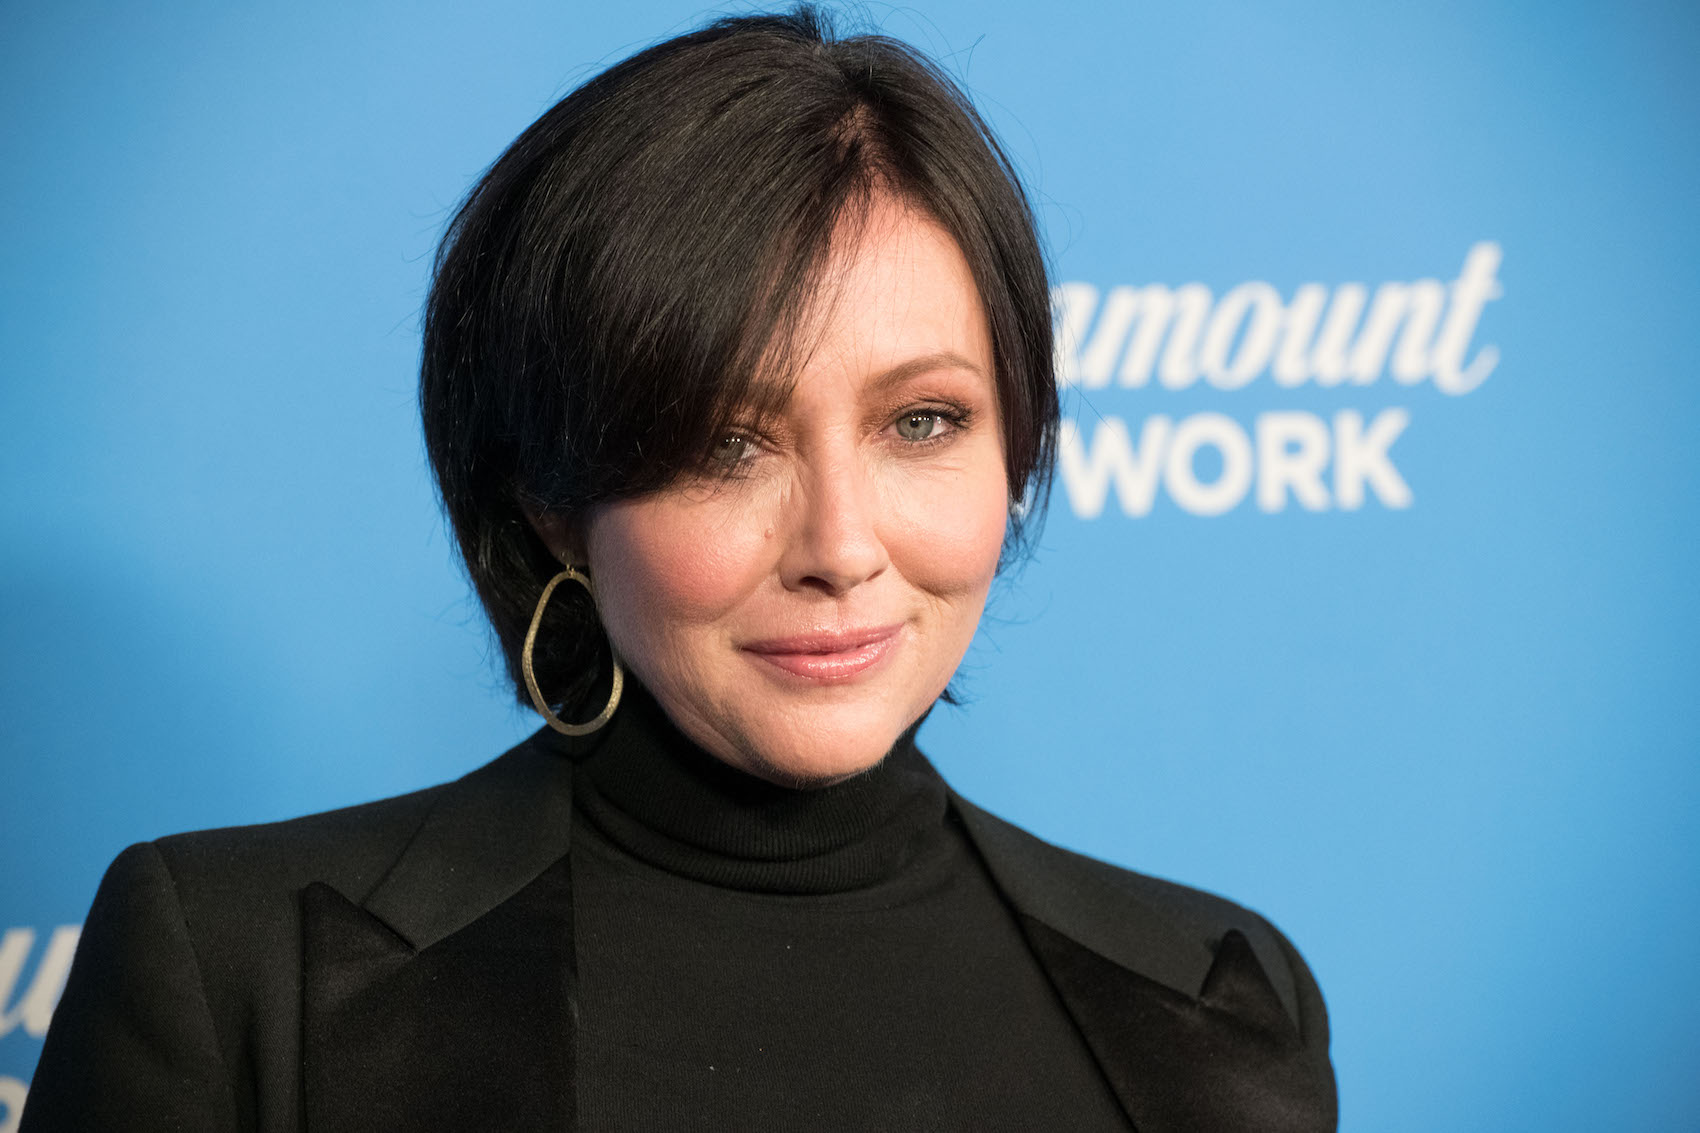 Shannen Doherty at the Paramount Network launch party